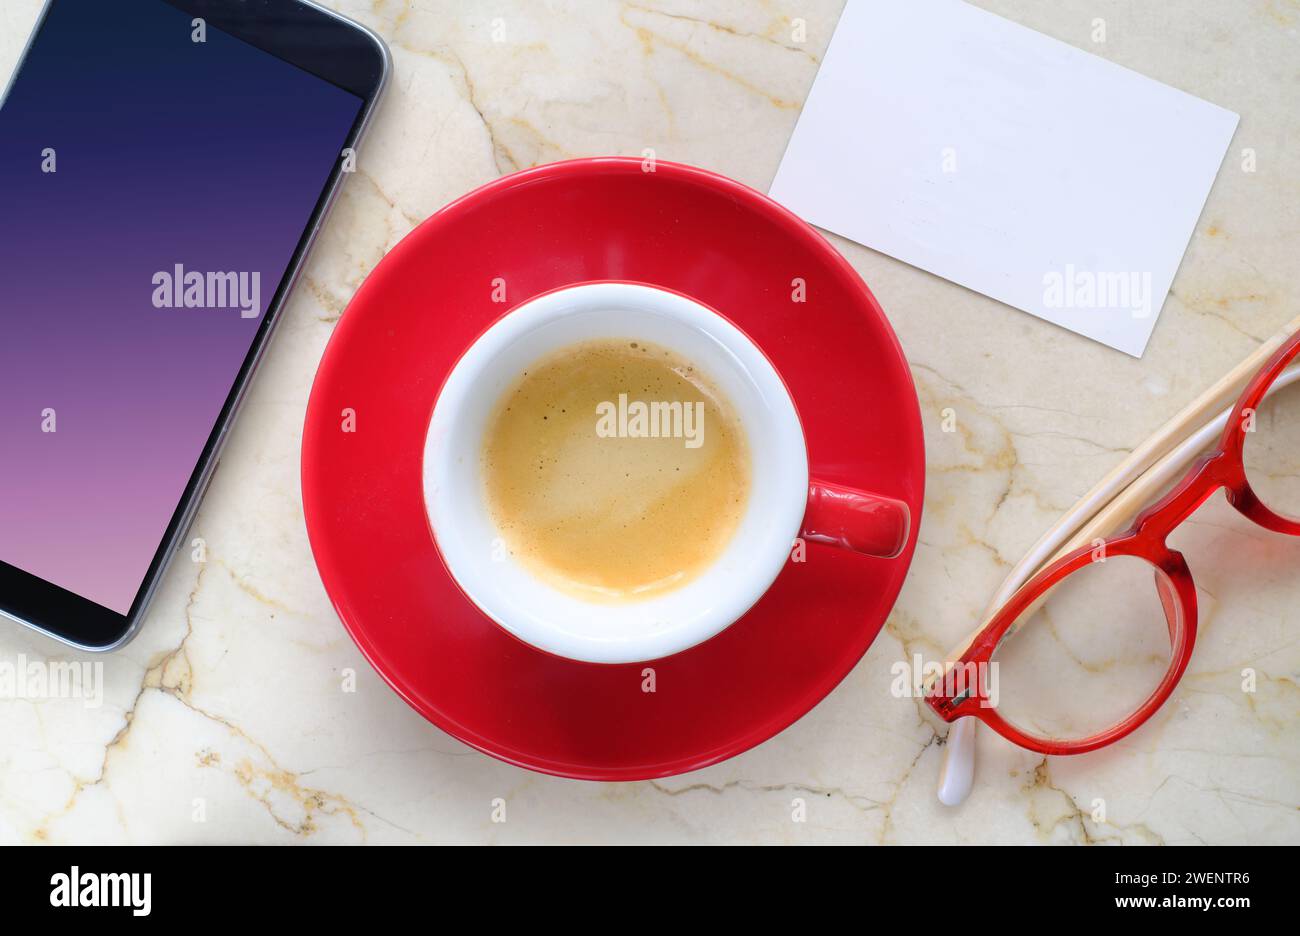 business apiontment, meeting or networking  concept or template, blank business card,cup of coffee smartphone and spectacles. Stock Photo